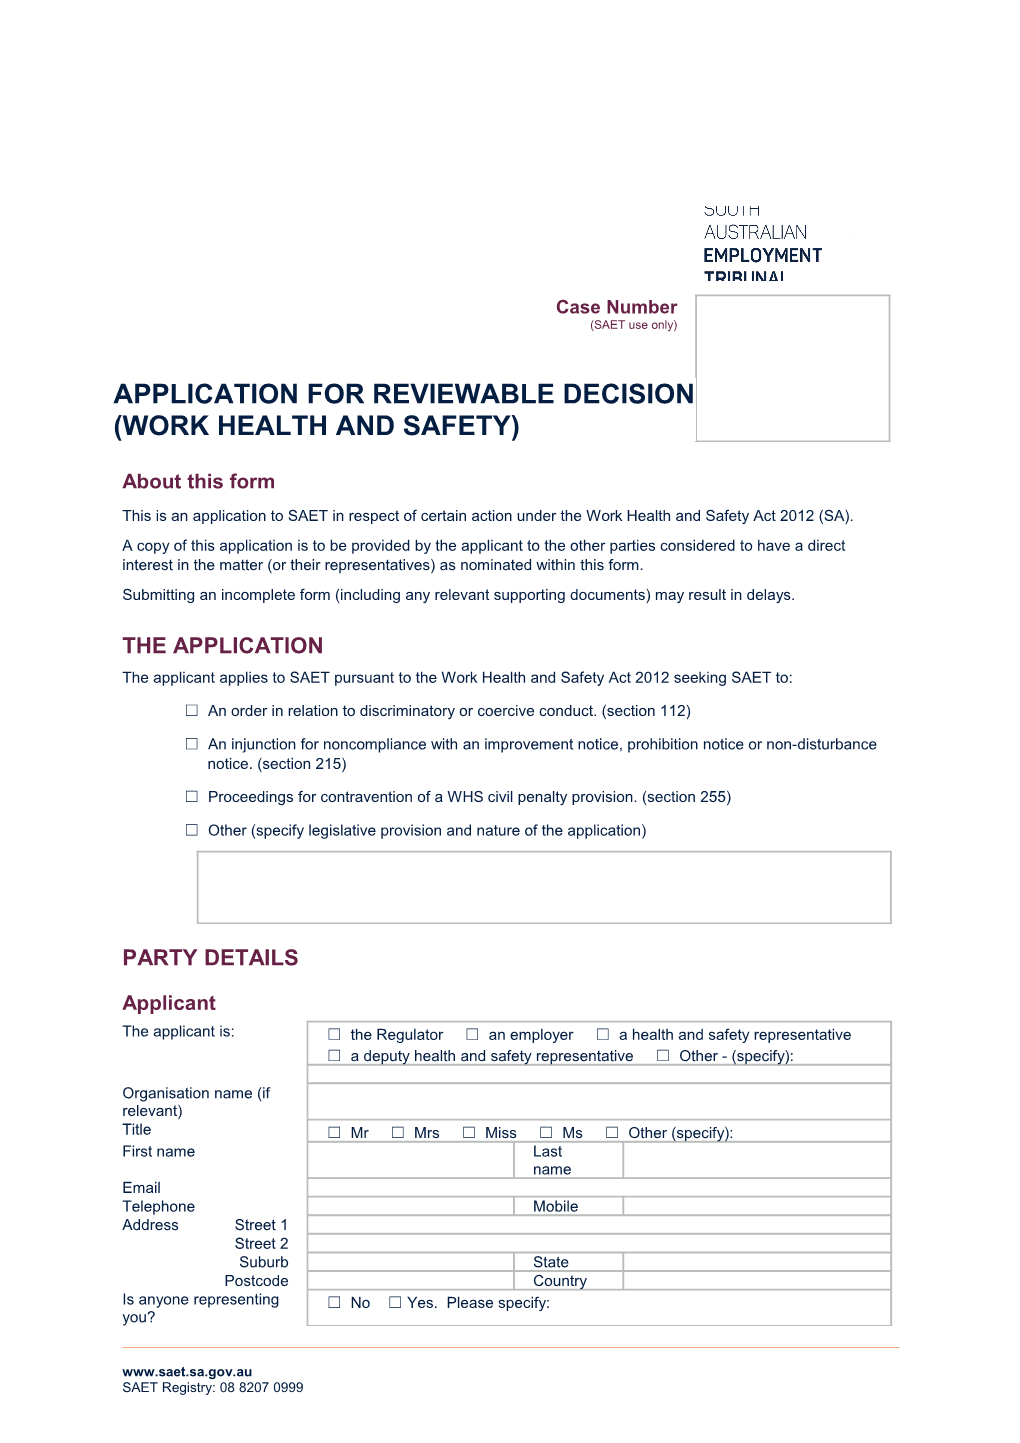 Application for Reviewable Decision (Work Health and Safety)